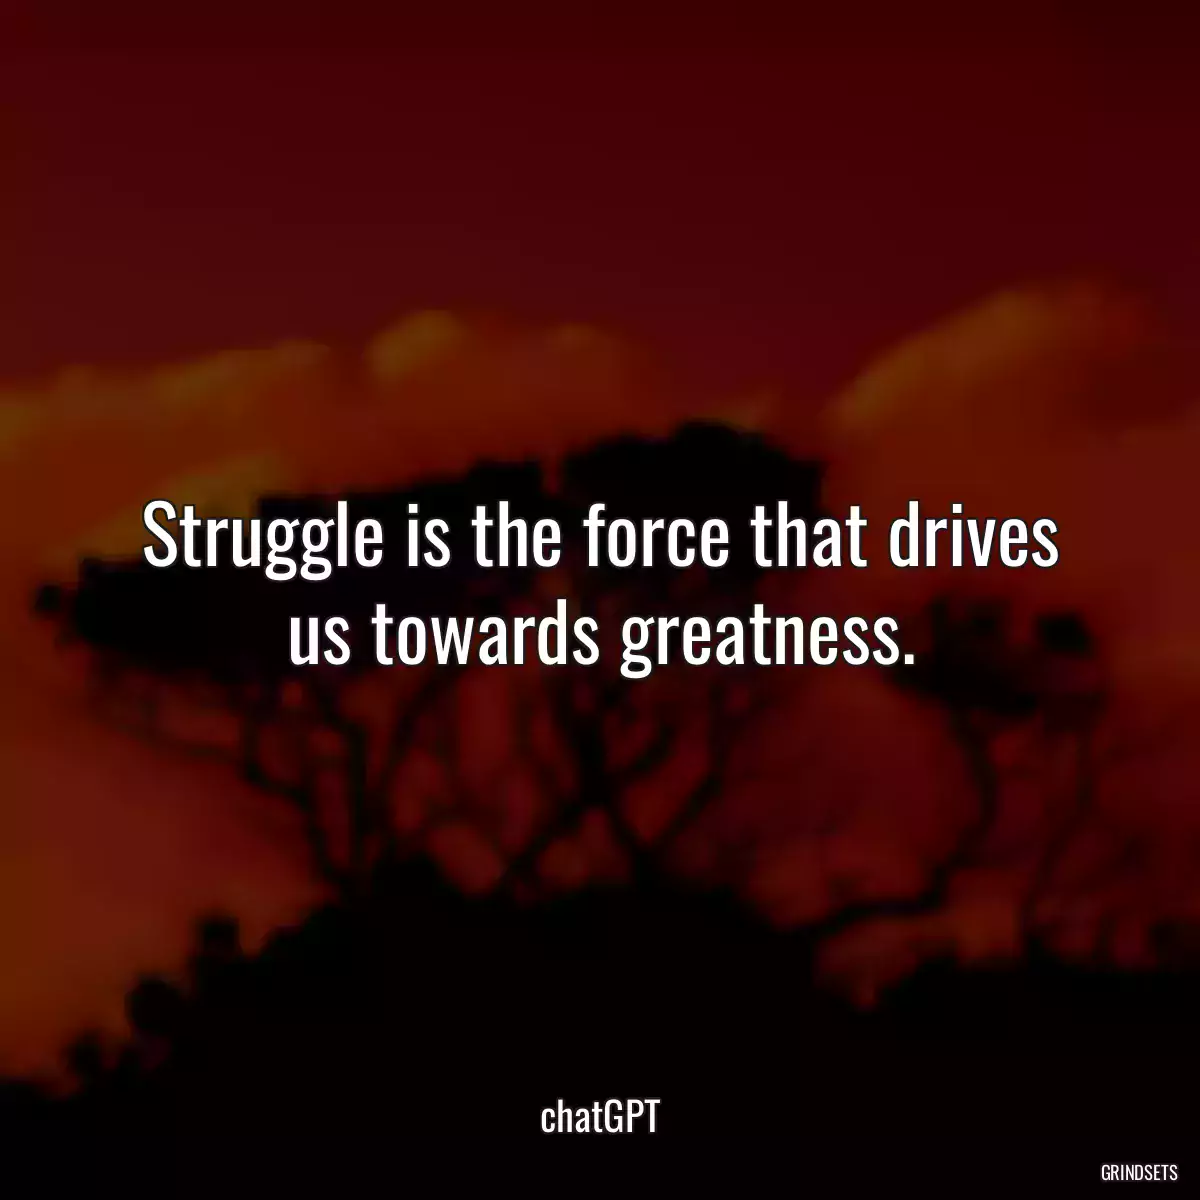 Struggle is the force that drives us towards greatness.